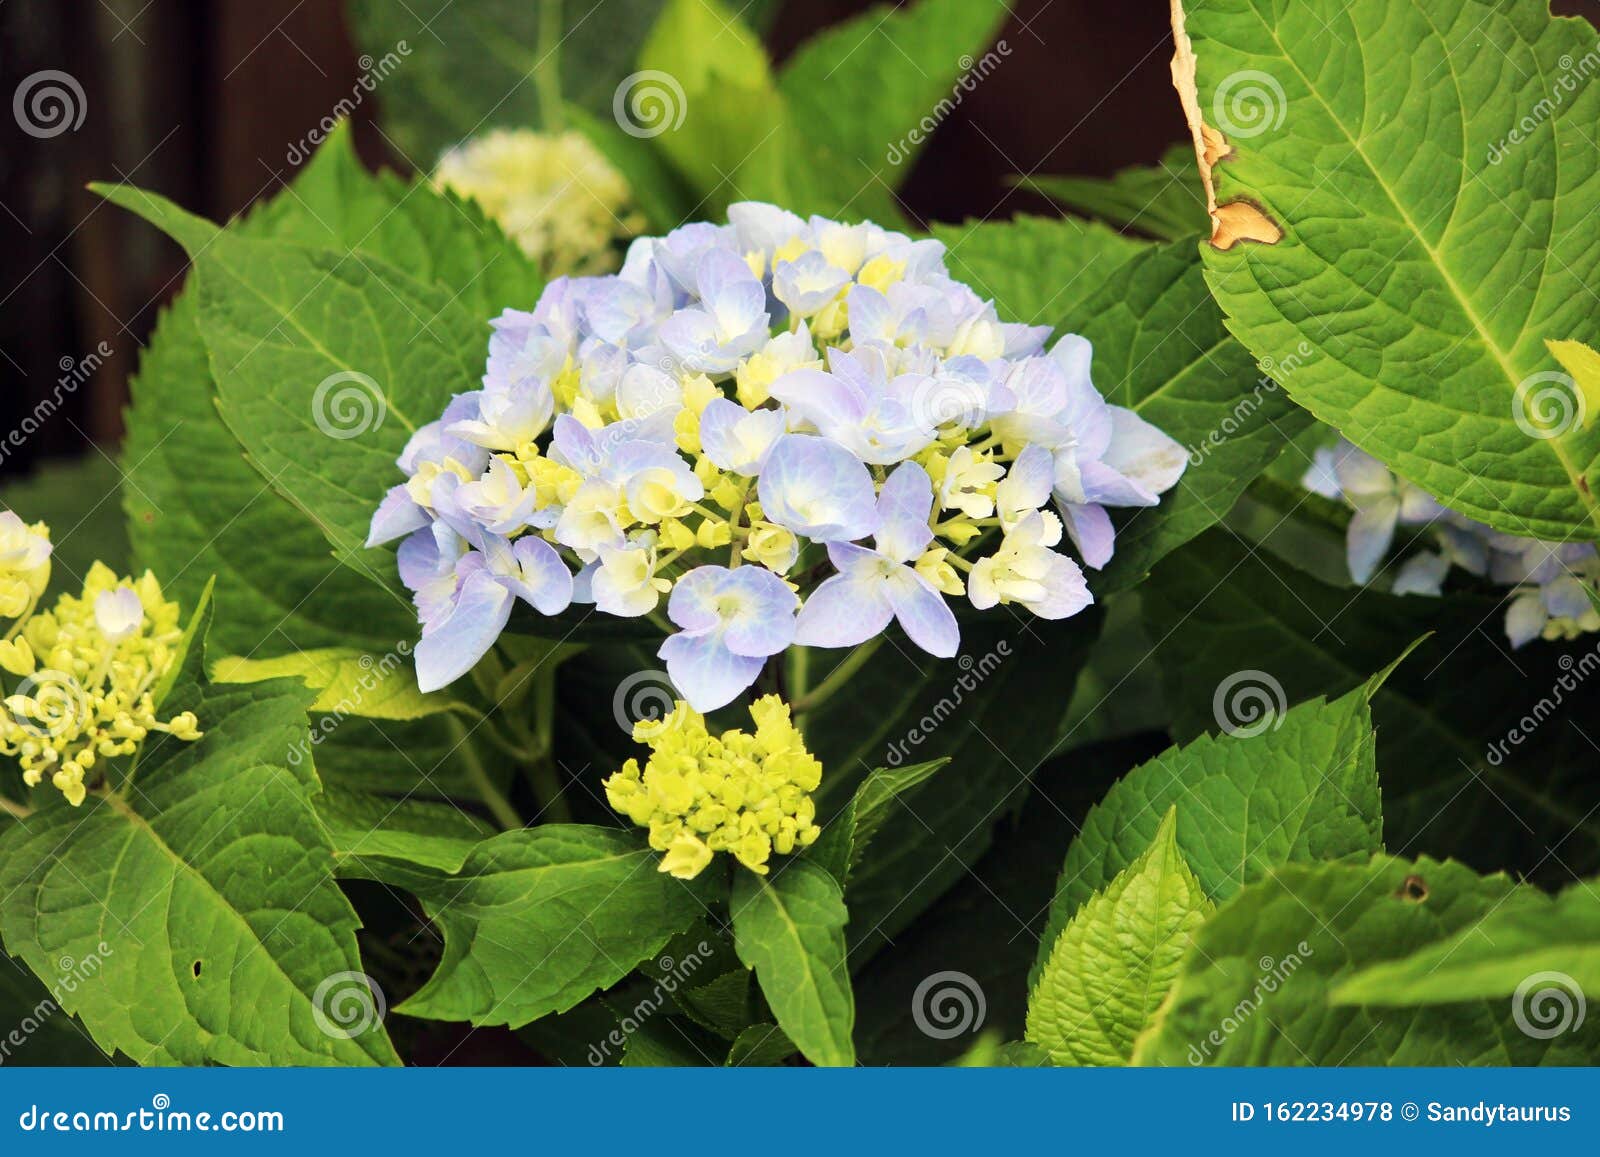 early in bloom phase, blueish lavender hydrangea